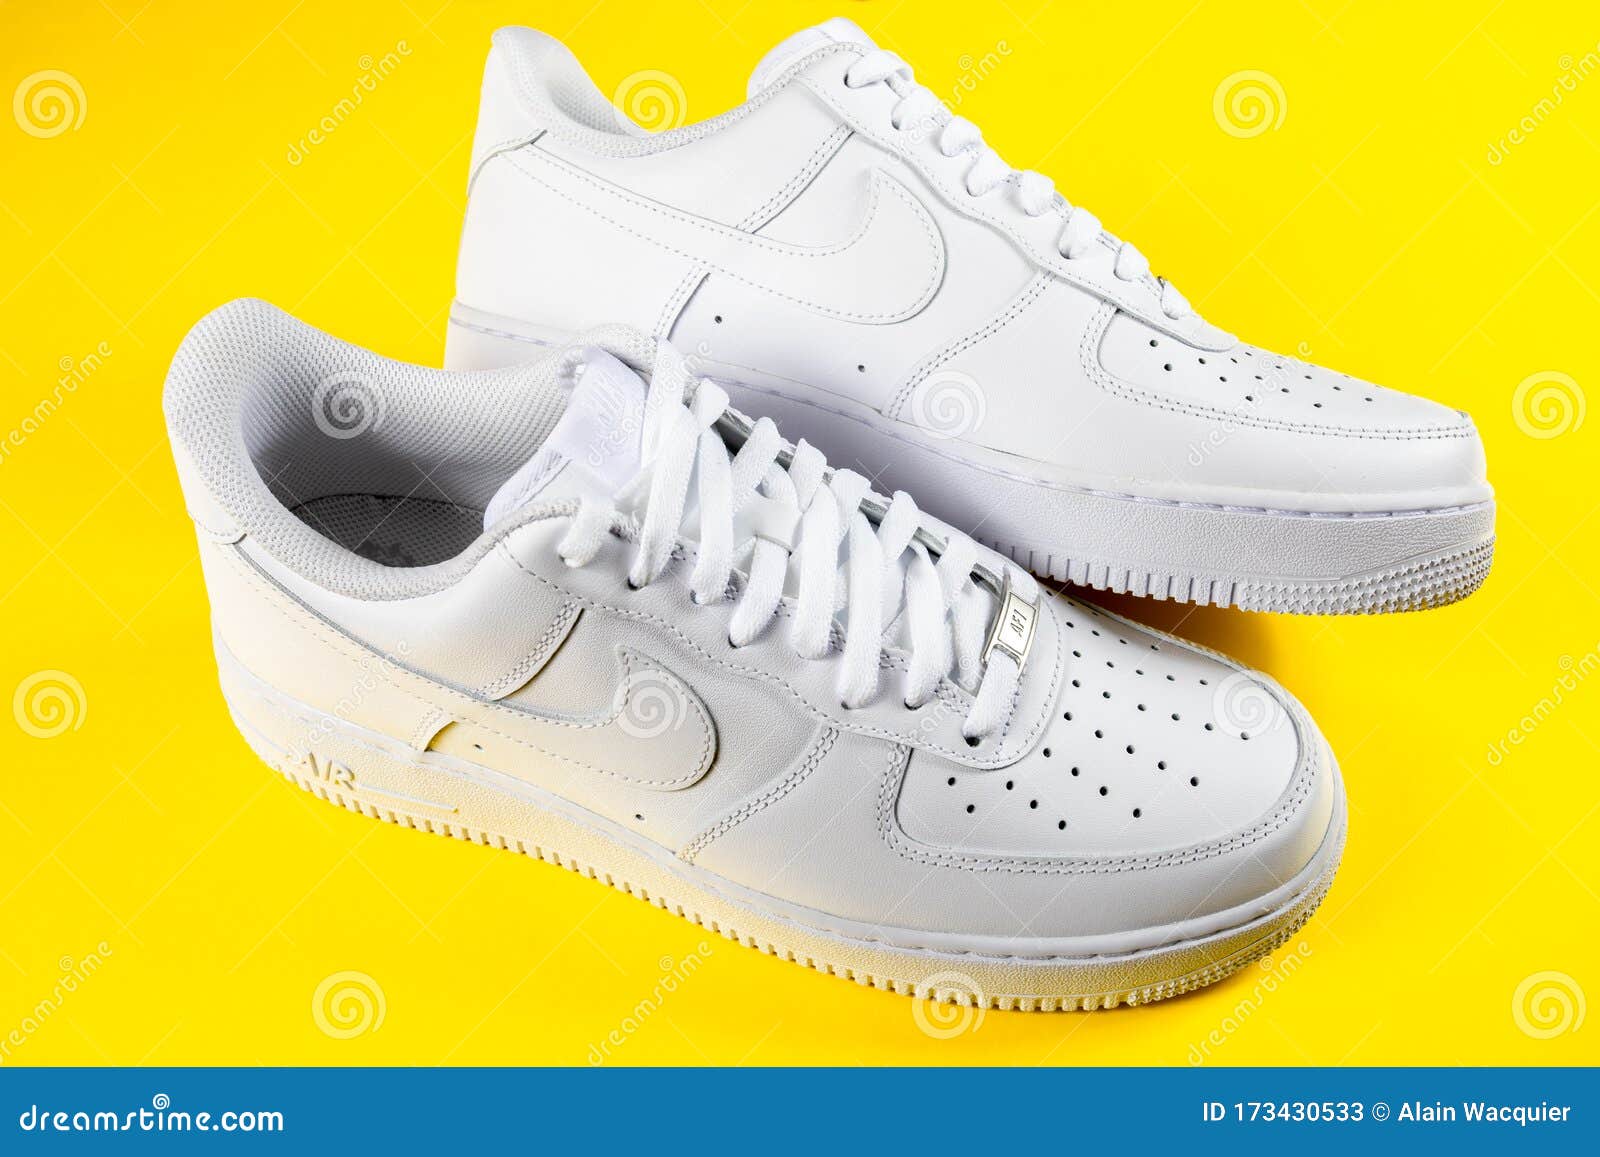 when was air force 1 made